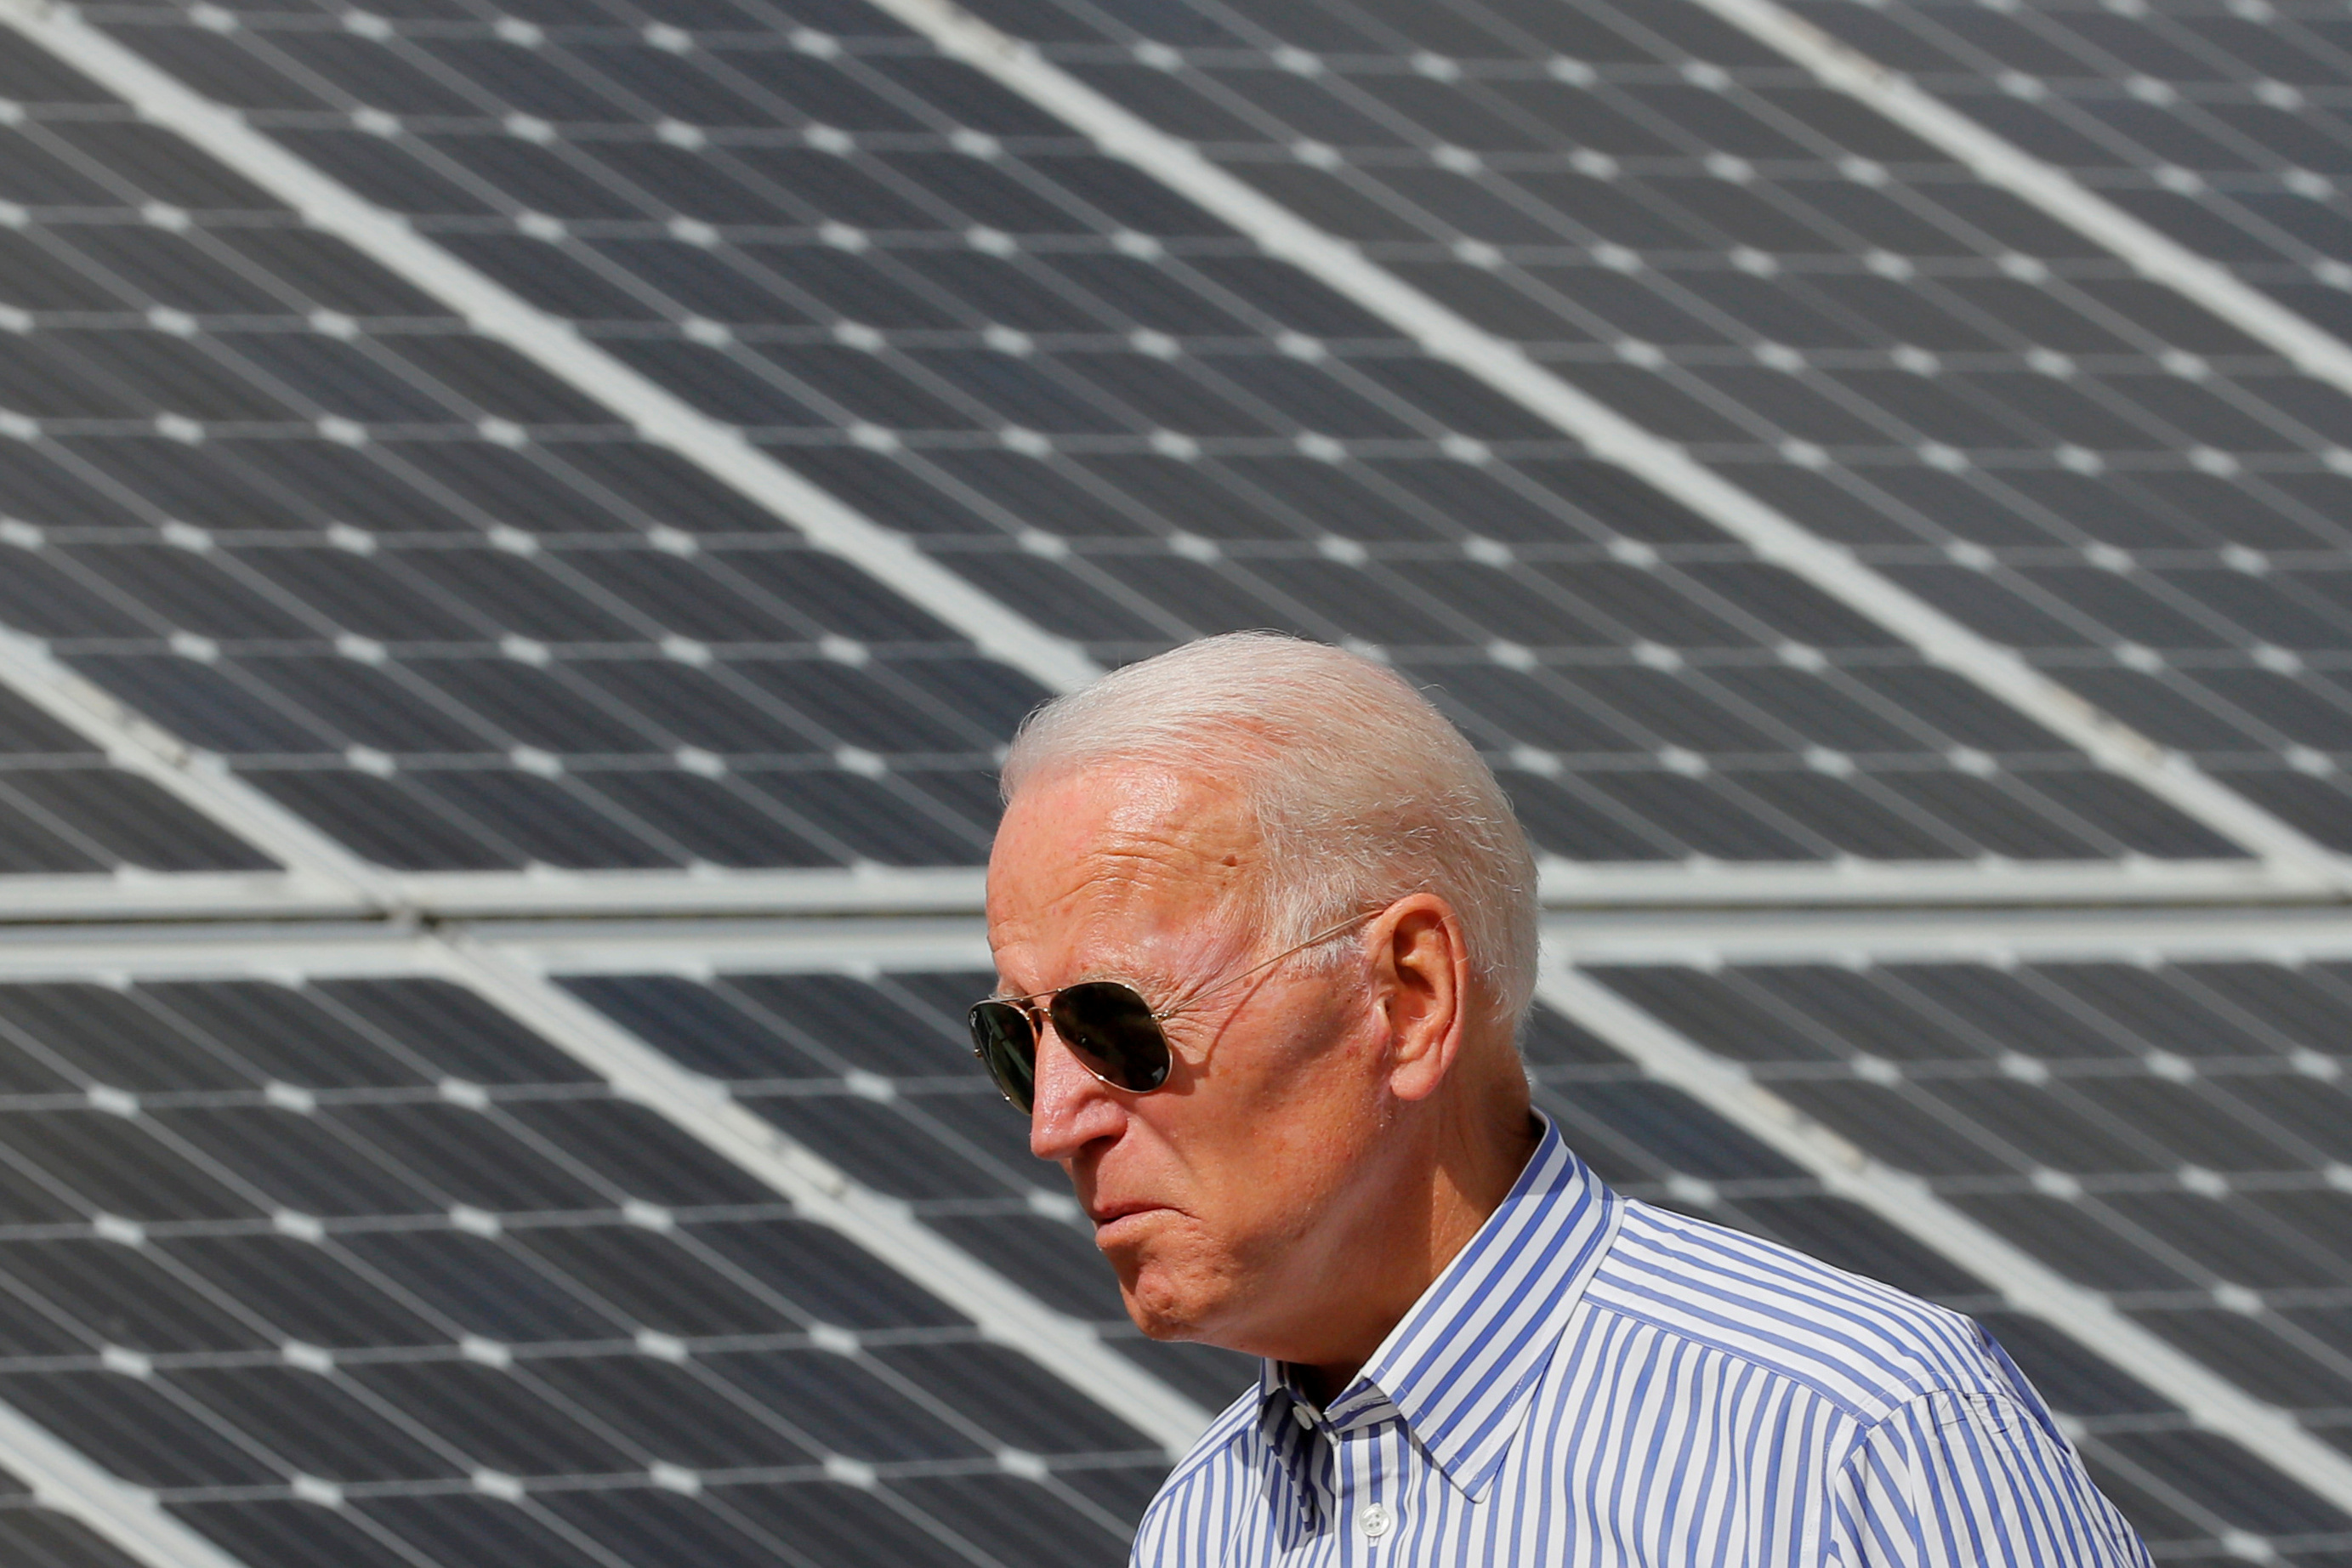 Democratic 2020 U.S. presidential candidate and former Vice President Joe Biden walks past solar panels while touring the Plymouth Area Renewable Energy Initiative in Plymouth, New Hampshire, U.S., June 4, 2019.   REUTERS/Brian Snyder/File Photo/File Photo